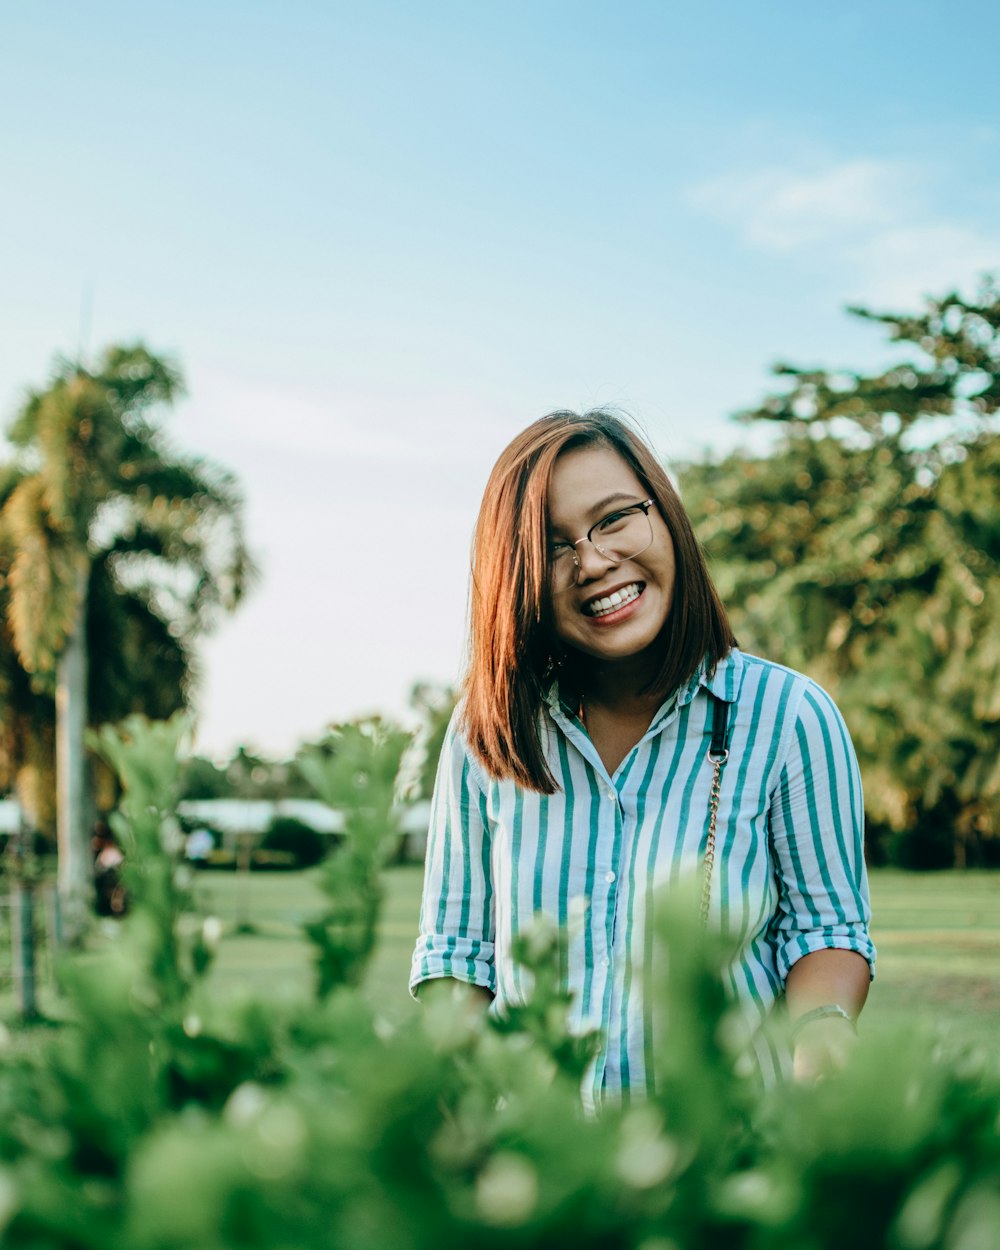 woman in blue and white striped shirt smiling